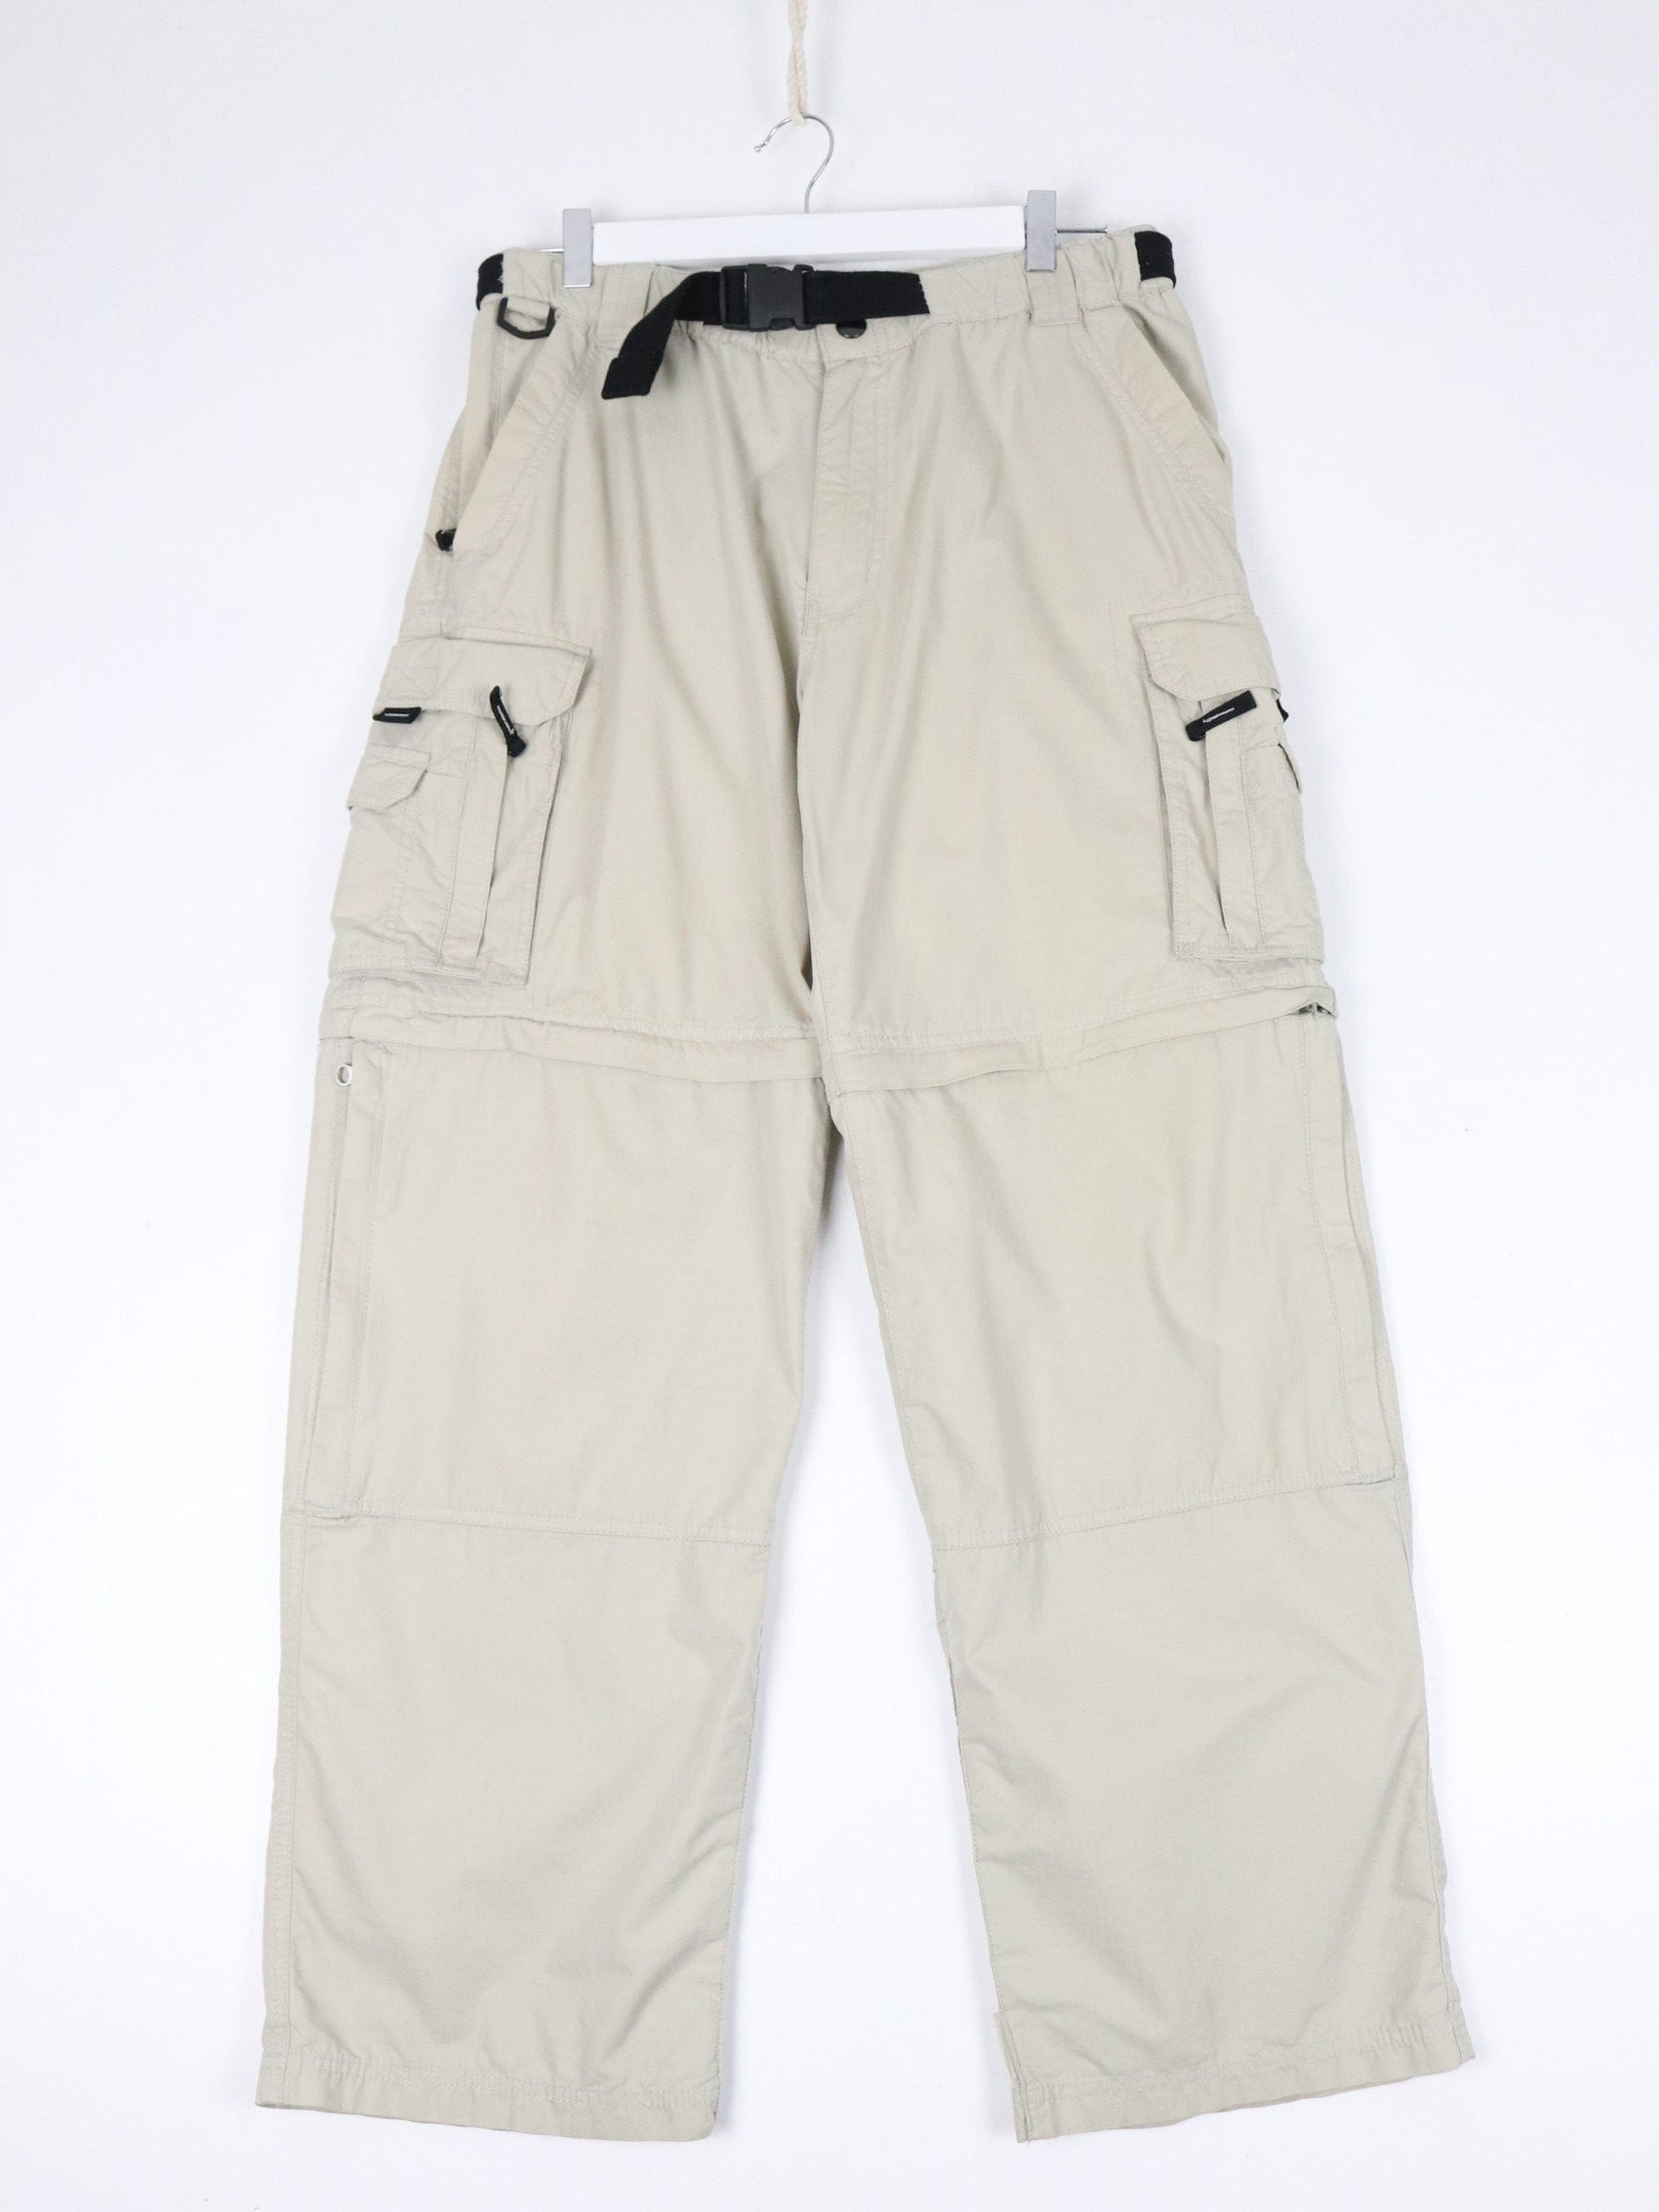 Other Pants BC Clothing Co Pants Mens Medium Beige Convertible Cargo Hiking 33 x 29